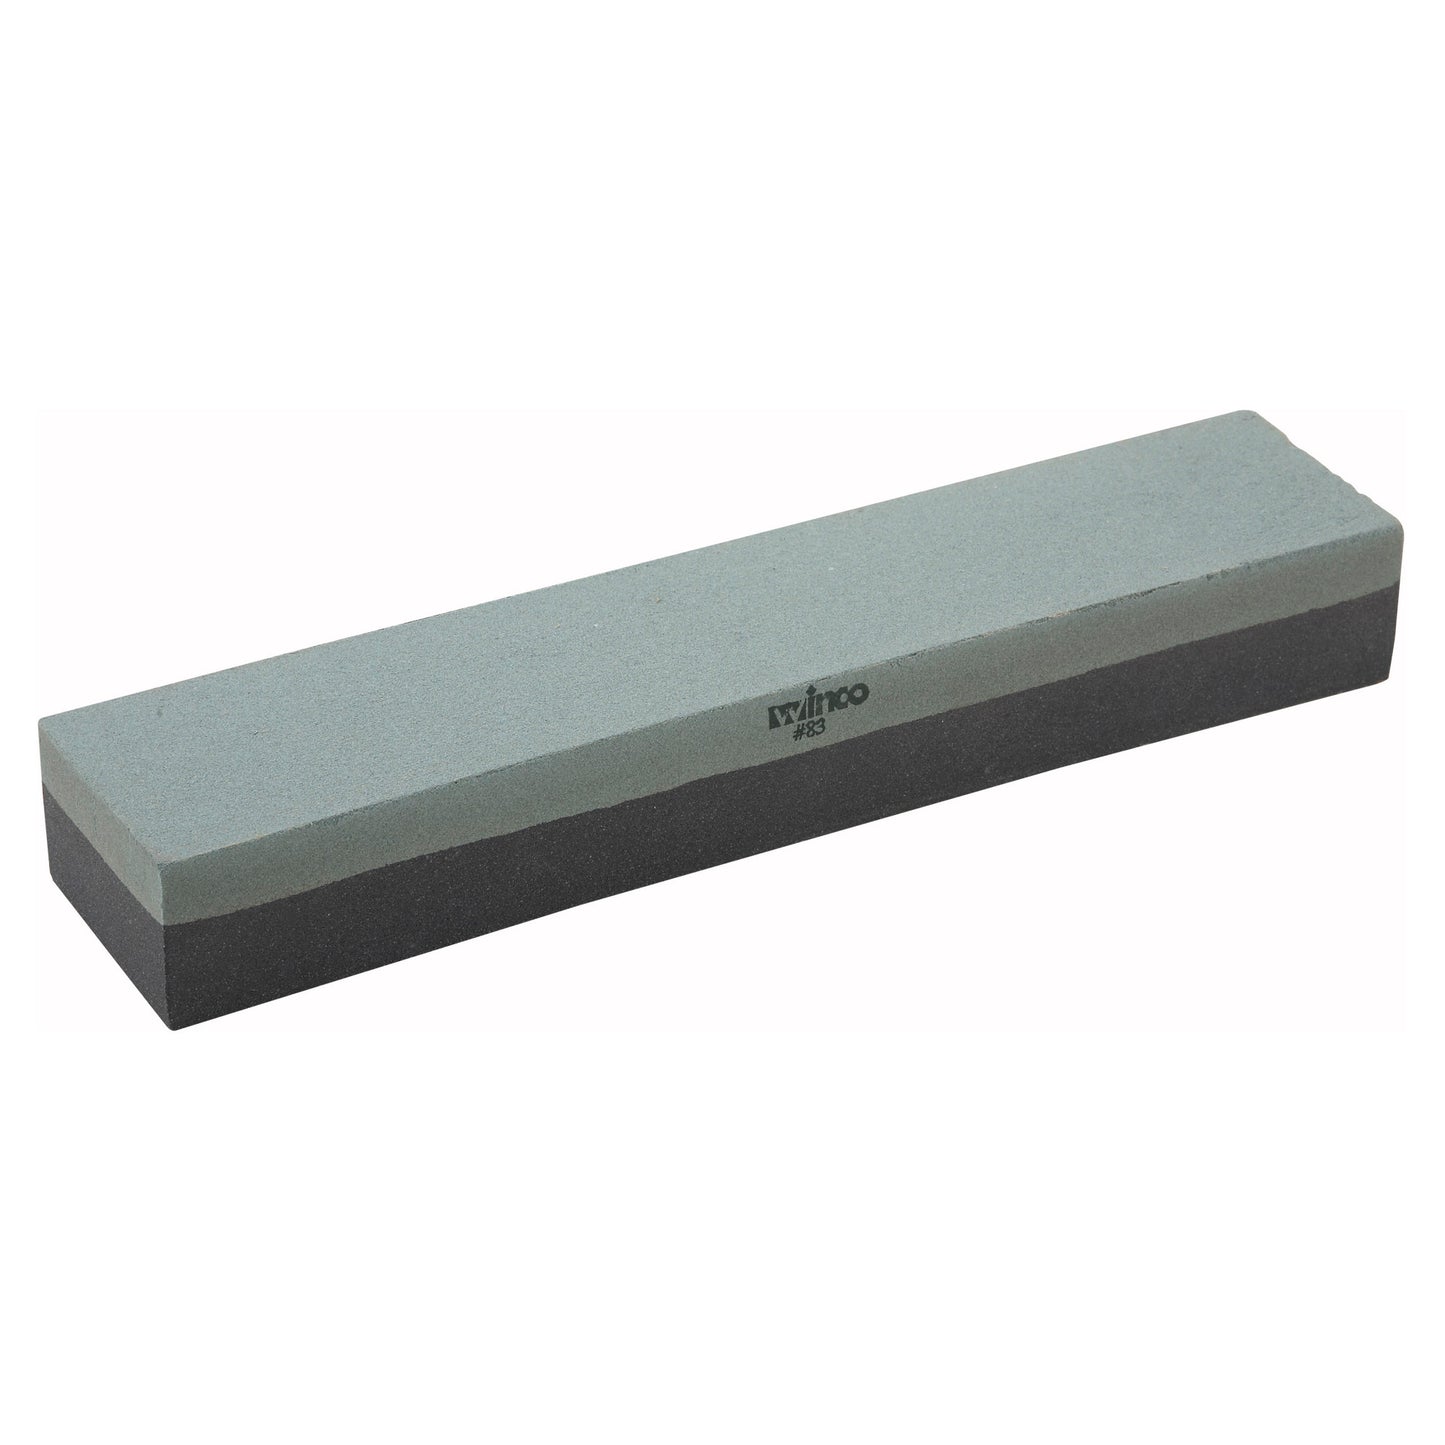 SS-1211 - Combination Sharpening Stone  with Fine and Medium Grain - 12 x 2-1/2 x 1-1/2